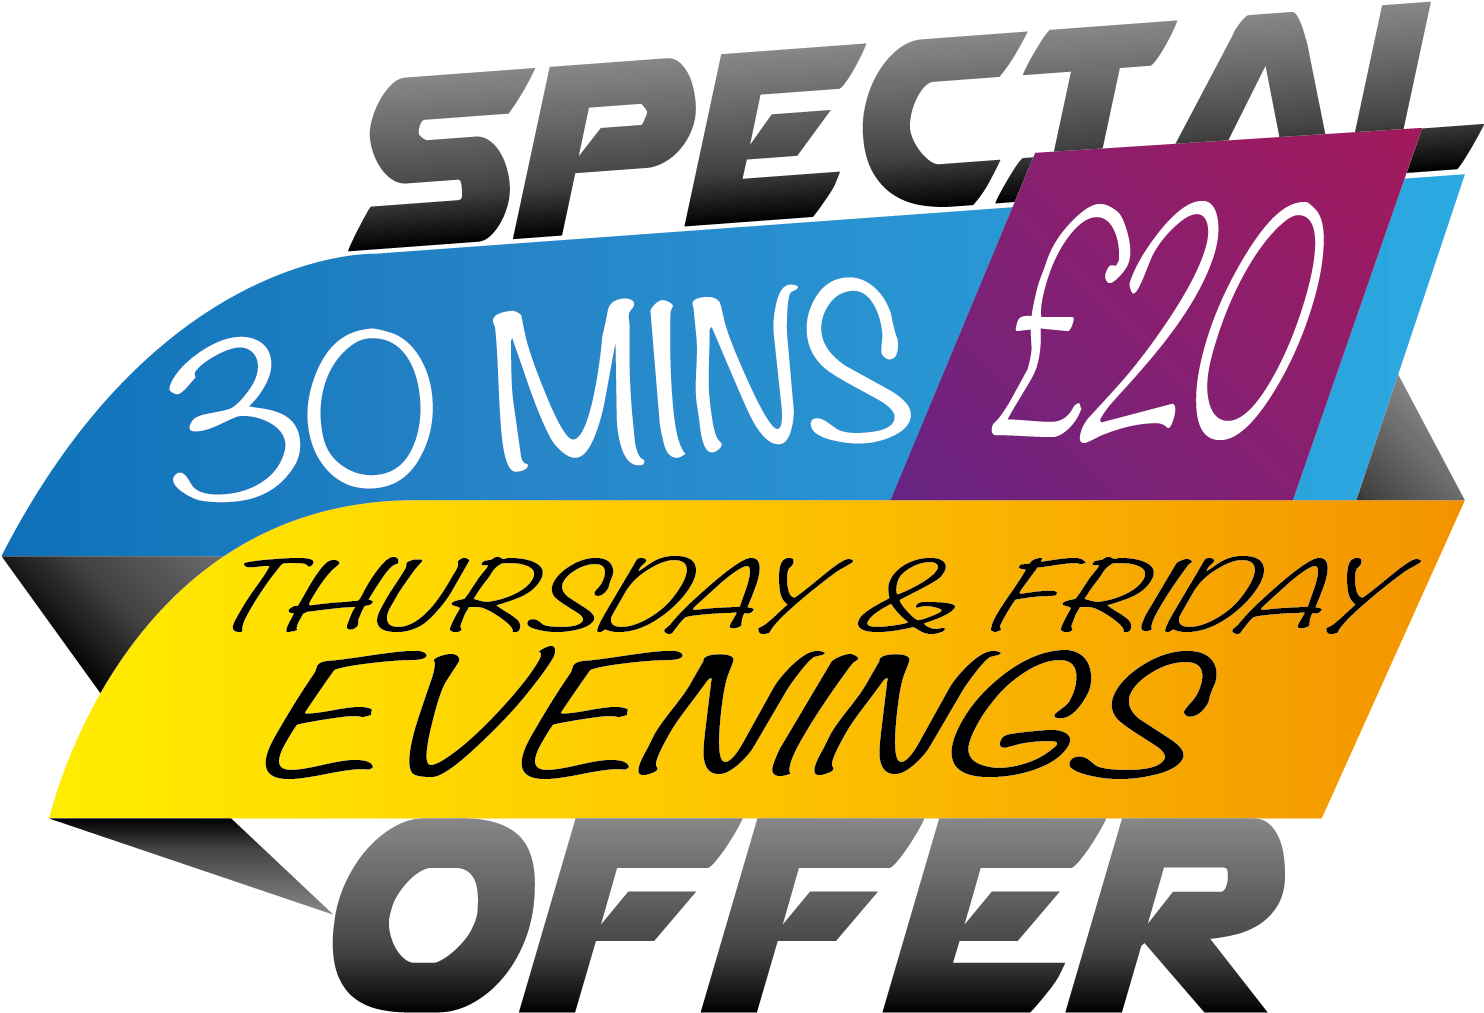 Evening Special Offer30 Mins20 Pounds PNG